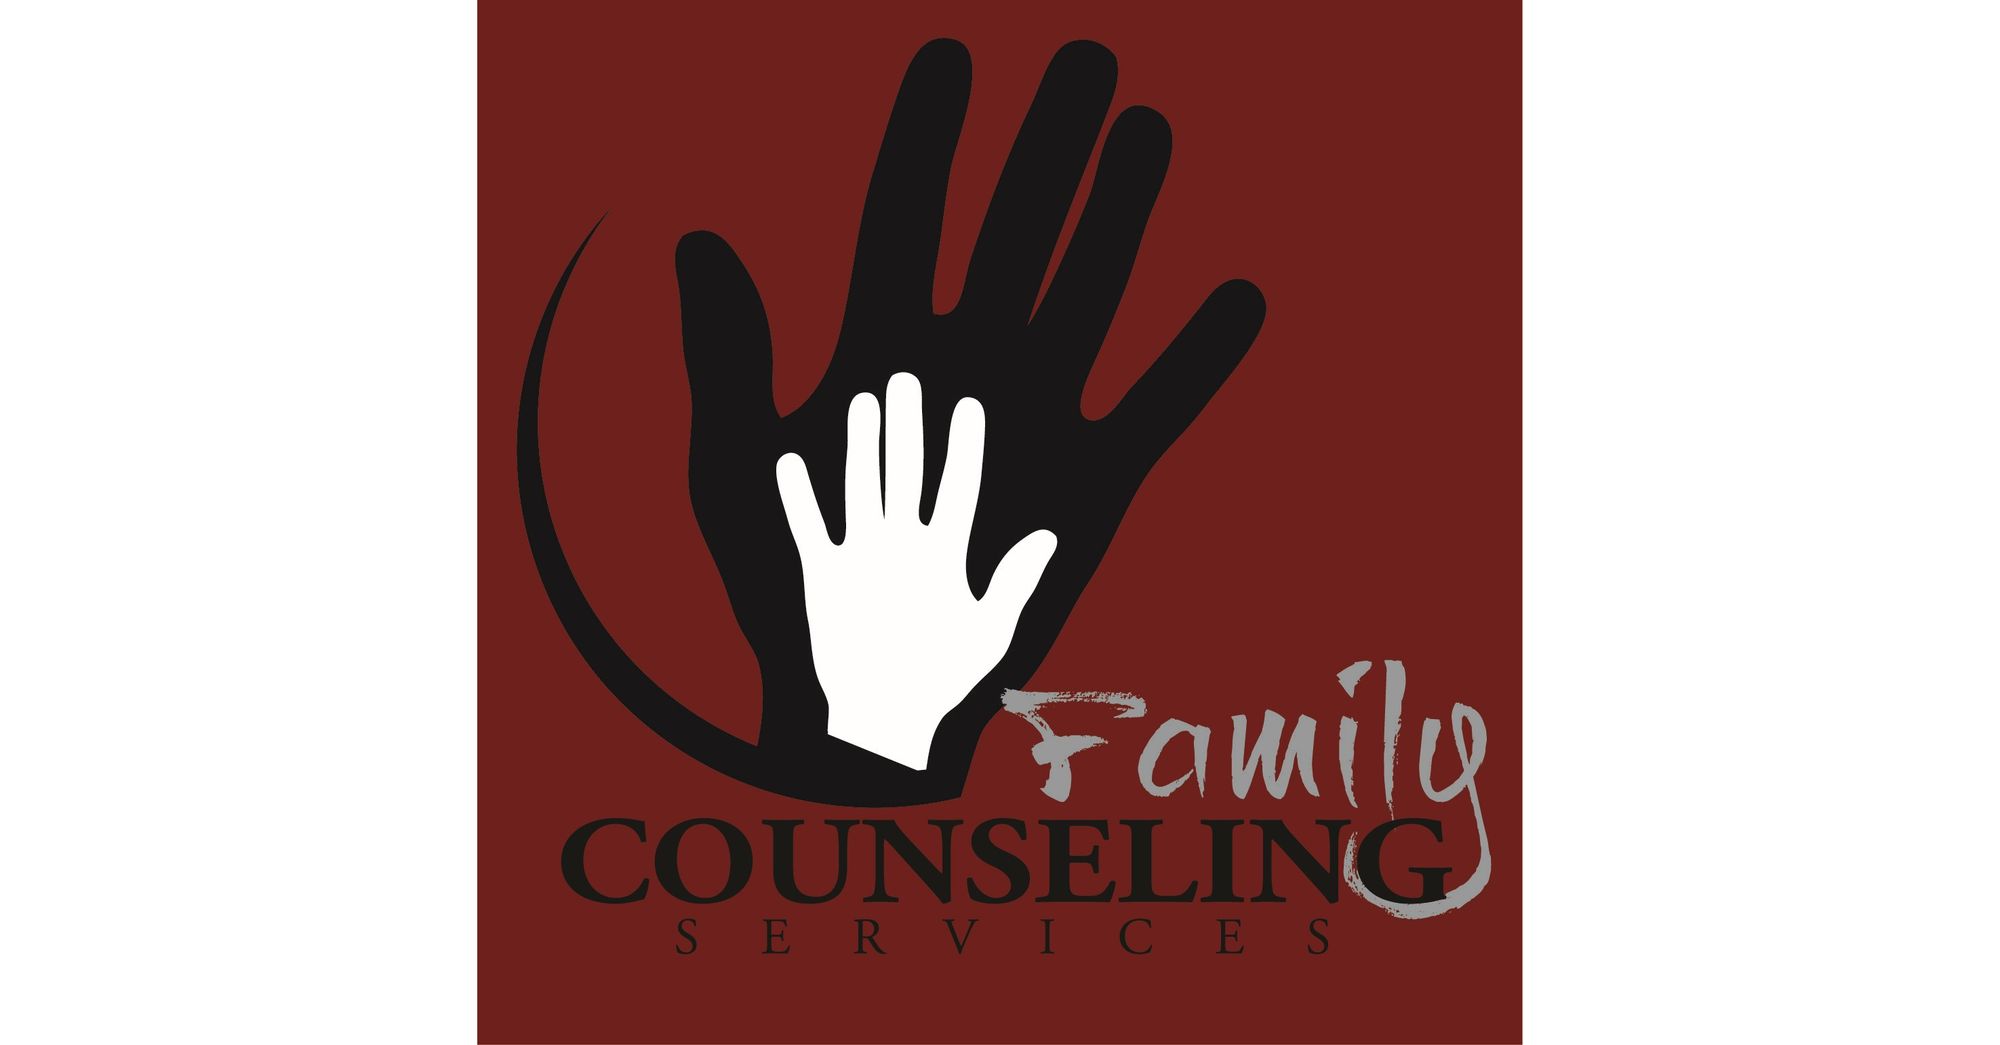 Ethical and Compassionate - Family Counseling Services